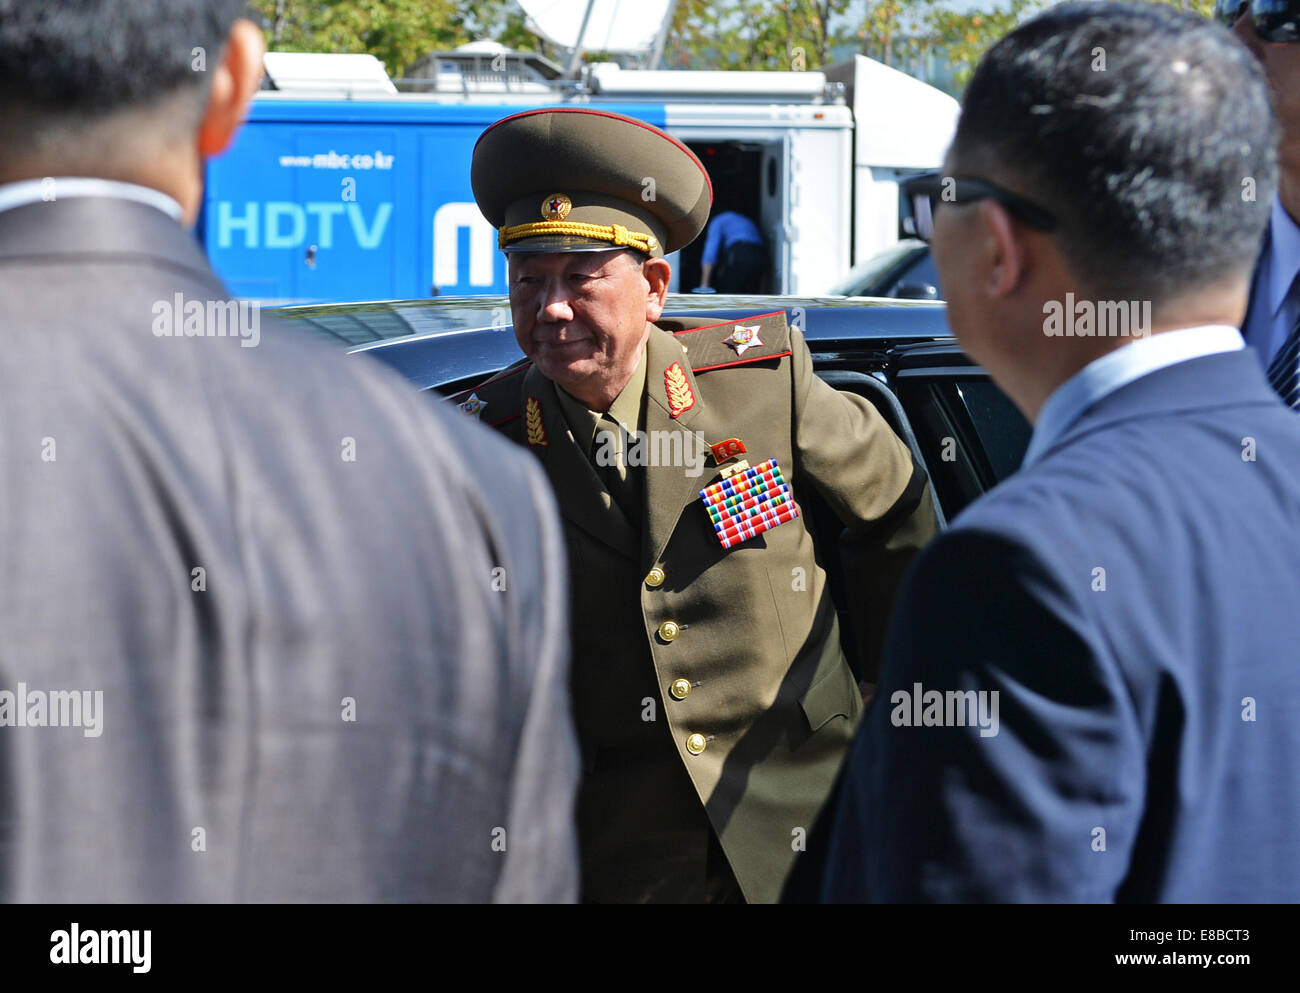 Incheon, South Korea. 4th Oct, 2014. Hwang Pyong So, leader of the Democratic People's Republic of Korea (DPRK), arrives at the hotel in Incheon, South Korea, Oct. 4, 2014. Hwang Pyong So will attend the closing ceremony of the 17th Asian Games in the city of Incheon, the official KCNA news agency reported Saturday. He was accompanied by Choe Ryong Hae and Kim Yang Gon, secretaries of the Central Committee of the Workers' Party of Korea (WPK). Credit:  Lu Zhe/Xinhua/Alamy Live News Stock Photo